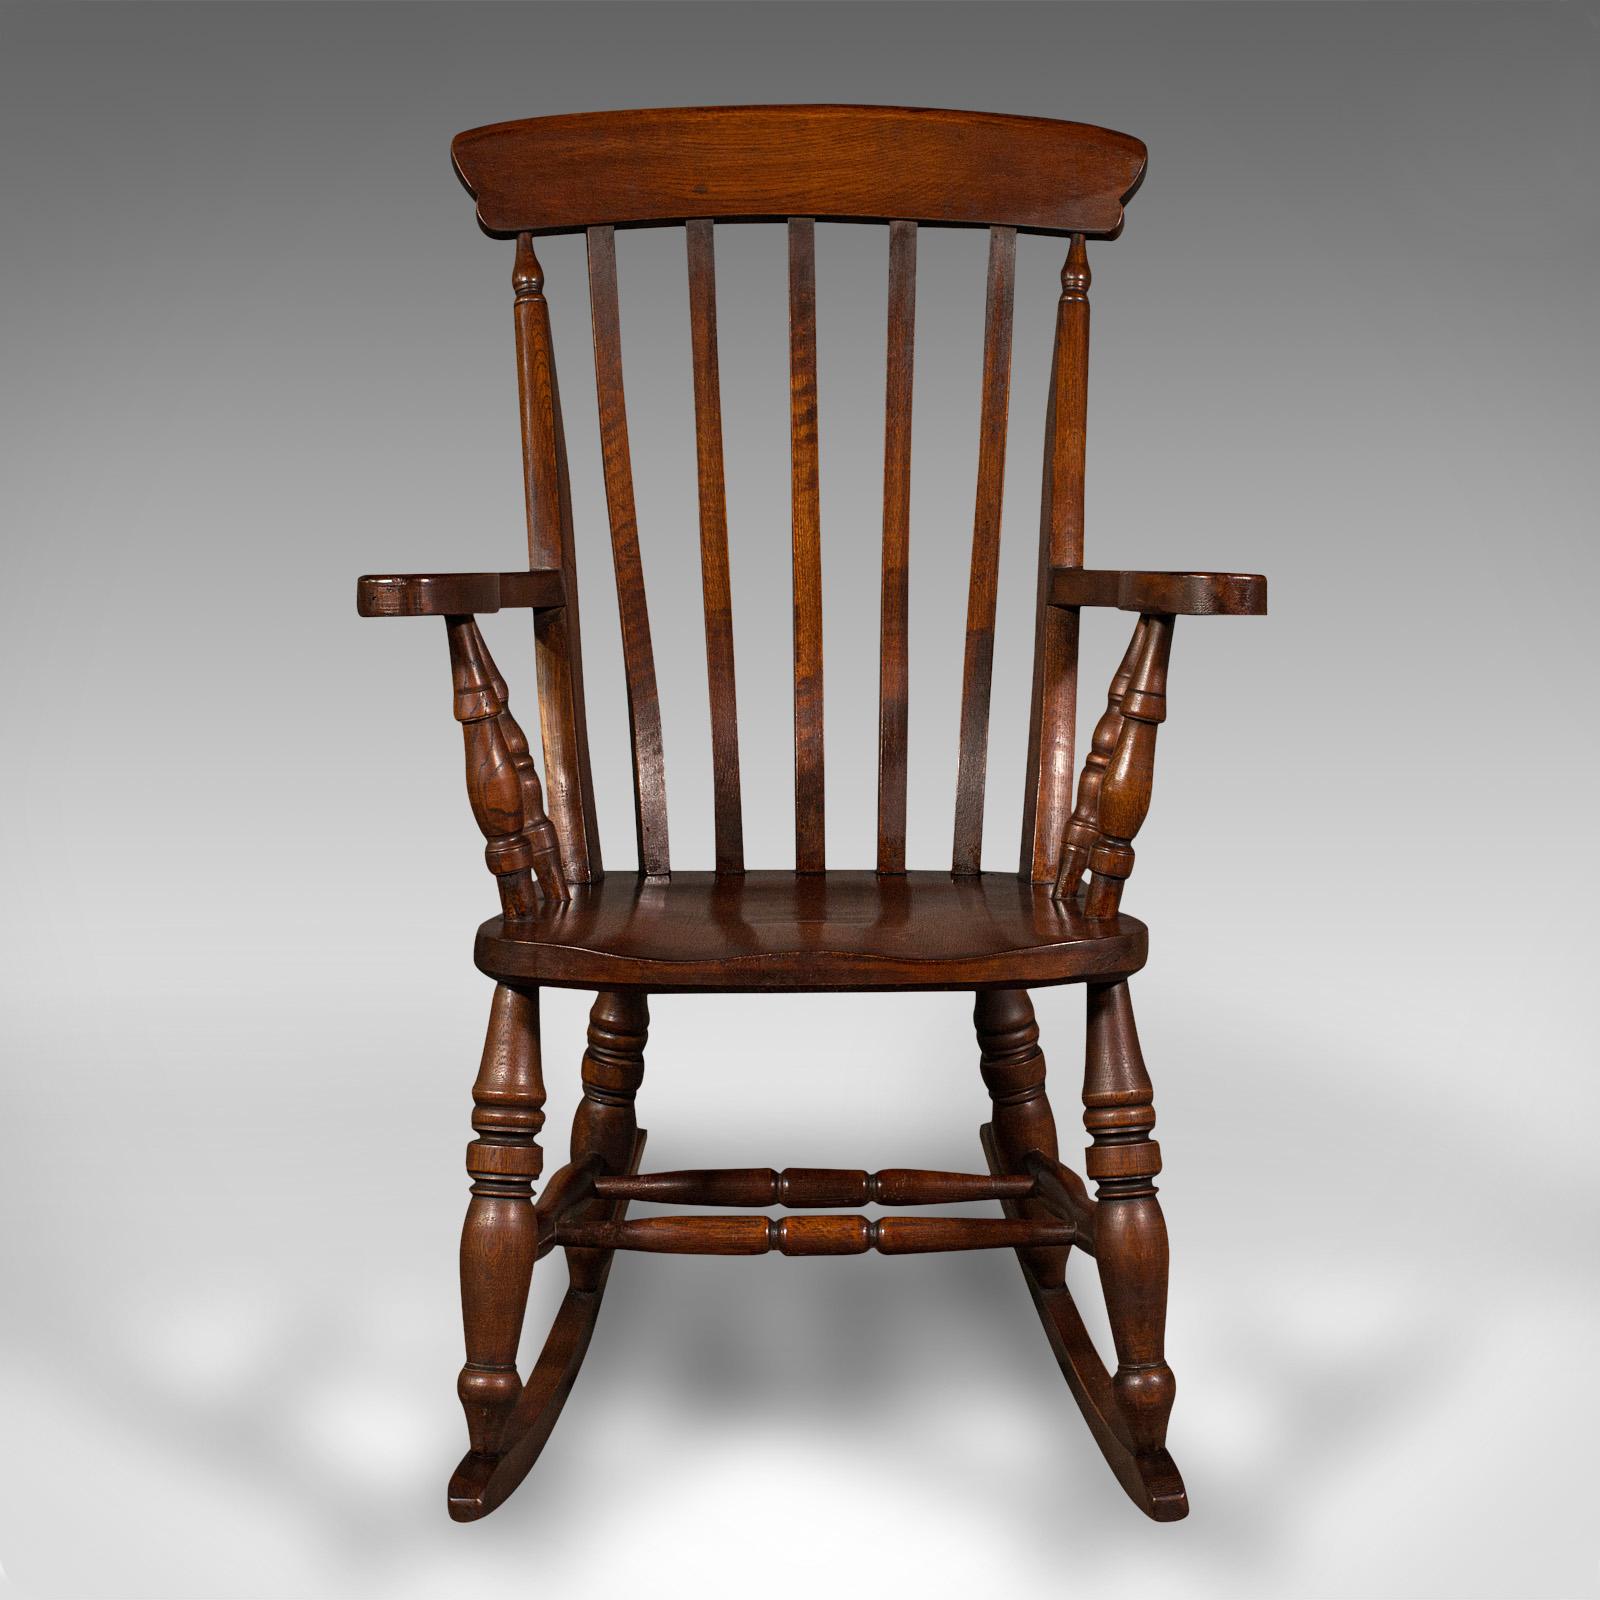 This is an antique lath back rocking chair. An English, oak and beech elbow seat, dating to the Victorian period, circa 1900.

Superb Victorian craftsmanship to this traditionally appealing rocker
Displays a desirable aged patina and in good